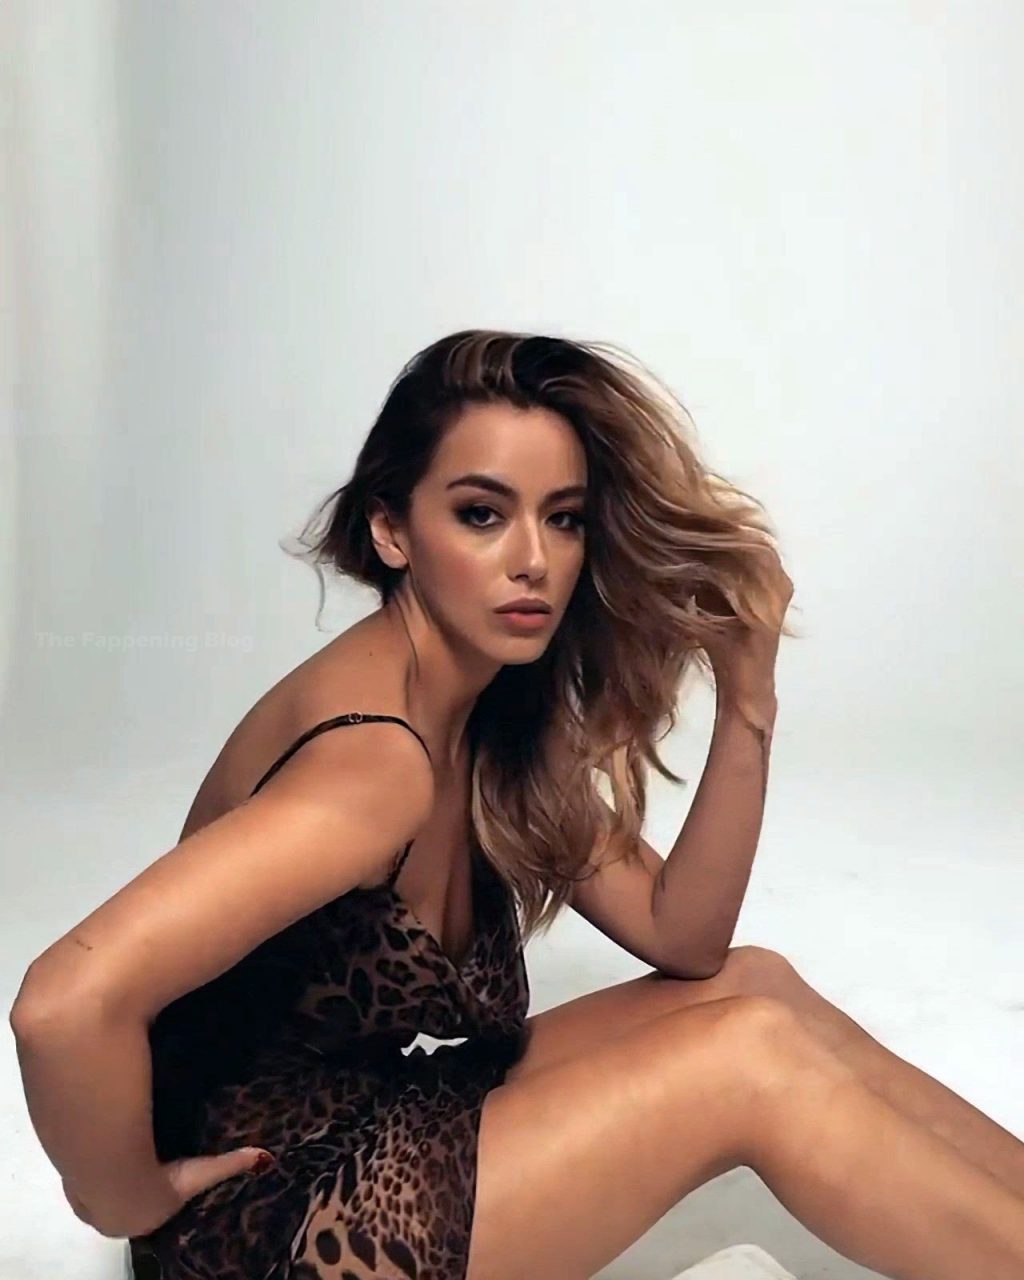 Chloe Bennet Shows Off Her Nude Breasts (12 Pics + Video)